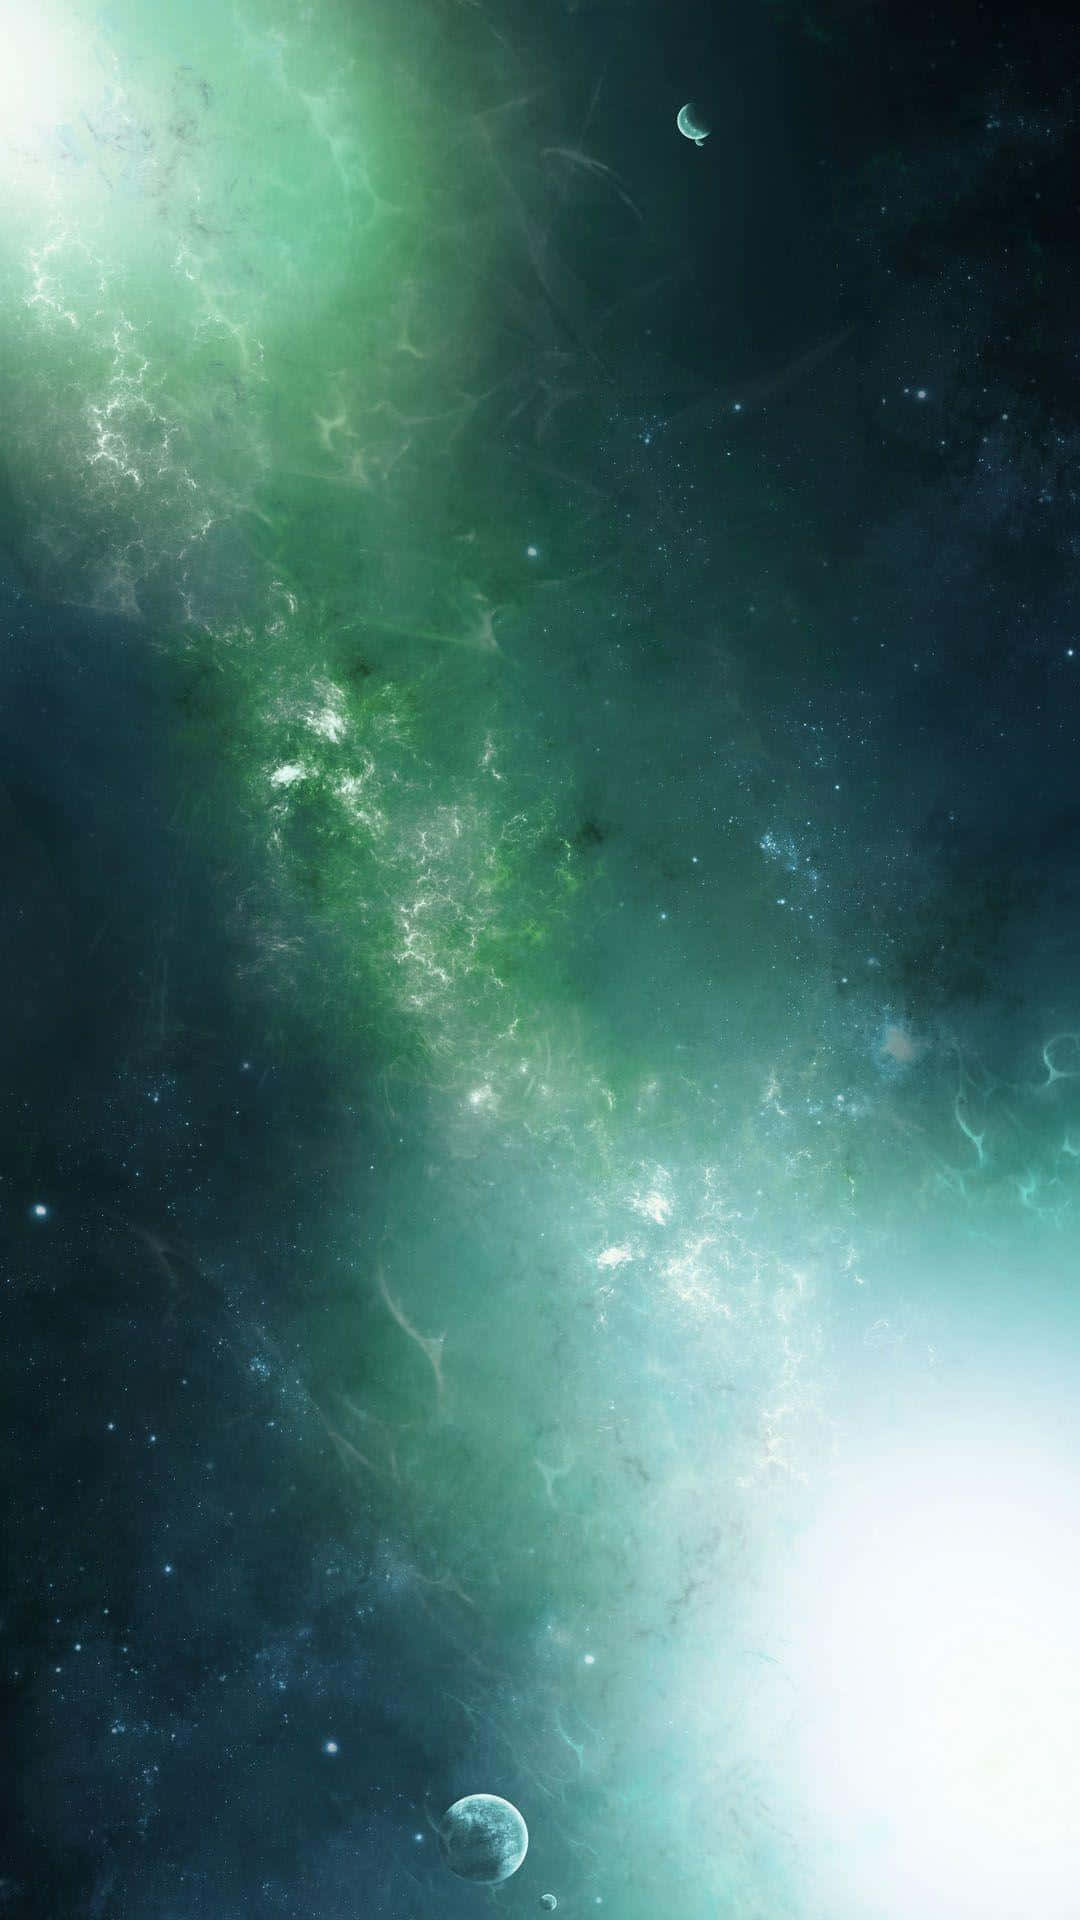 Explore the beauty of the Green Galaxy Wallpaper